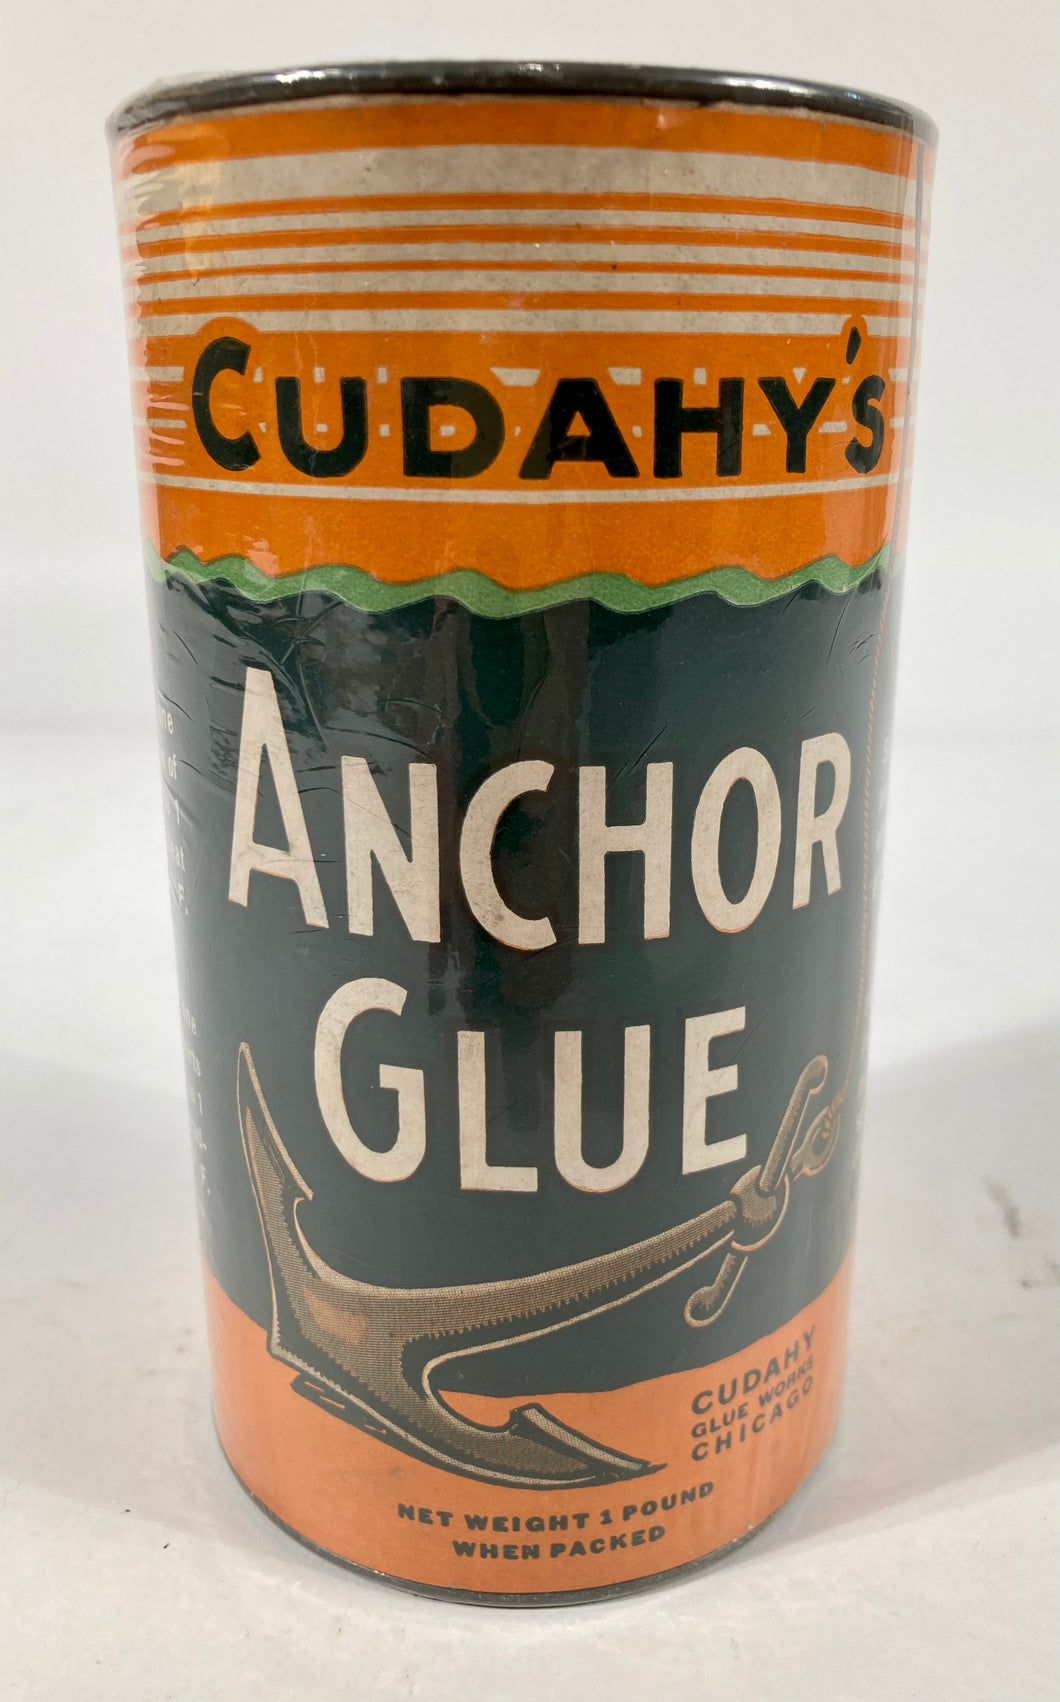 Antique, Unopened CUDAHY'S Anchor Glue, Vintage Nautical Product